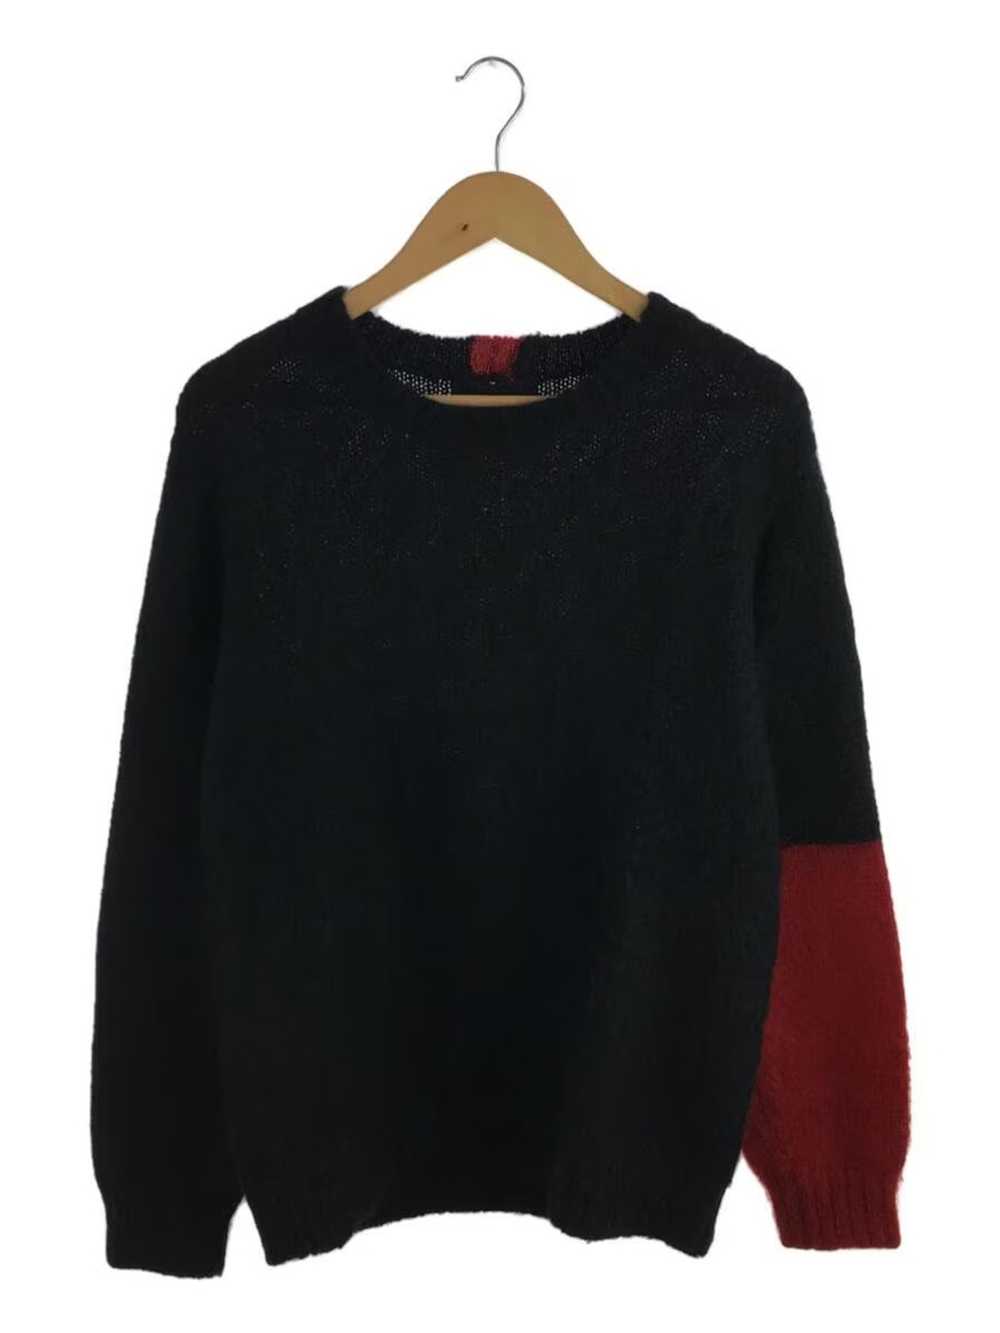 Undercover Fluffy Mohair Block Knit Sweater - image 1